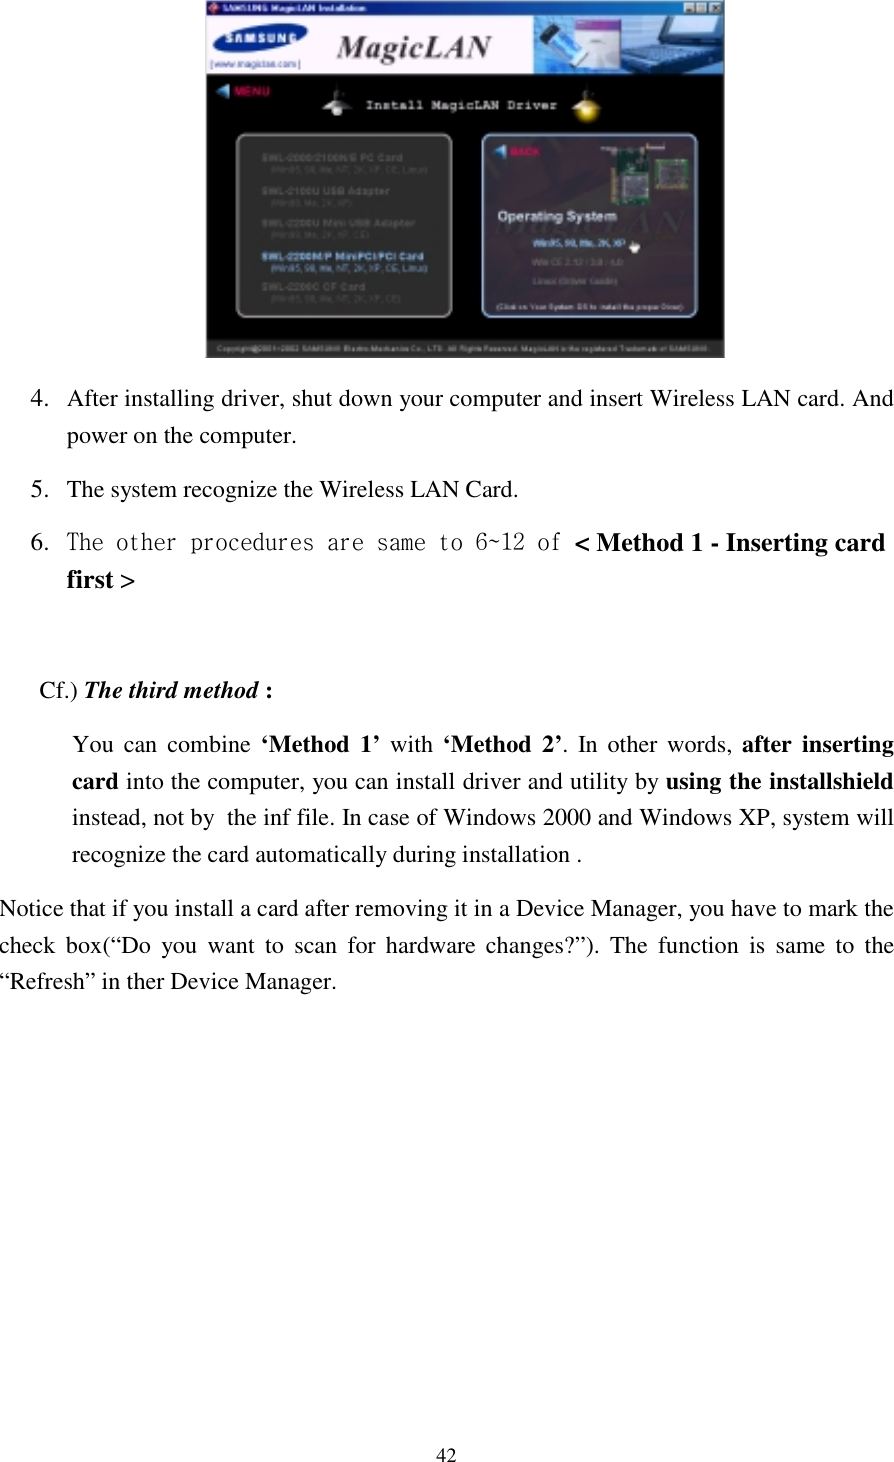  42         4.  After installing driver, shut down your computer and insert Wireless LAN card. And power on the computer. 5.  The system recognize the Wireless LAN Card.  6.  The other procedures are same to 6~12 of &lt; Method 1 - Inserting card first &gt;   Cf.) The third method : You can combine ‘Method 1’ with ‘Method 2’. In other words, after inserting card into the computer, you can install driver and utility by using the installshield instead, not by  the inf file. In case of Windows 2000 and Windows XP, system will recognize the card automatically during installation .  Notice that if you install a card after removing it in a Device Manager, you have to mark the check box(“Do you want to scan for hardware changes?”). The function is same to the “Refresh” in ther Device Manager.            